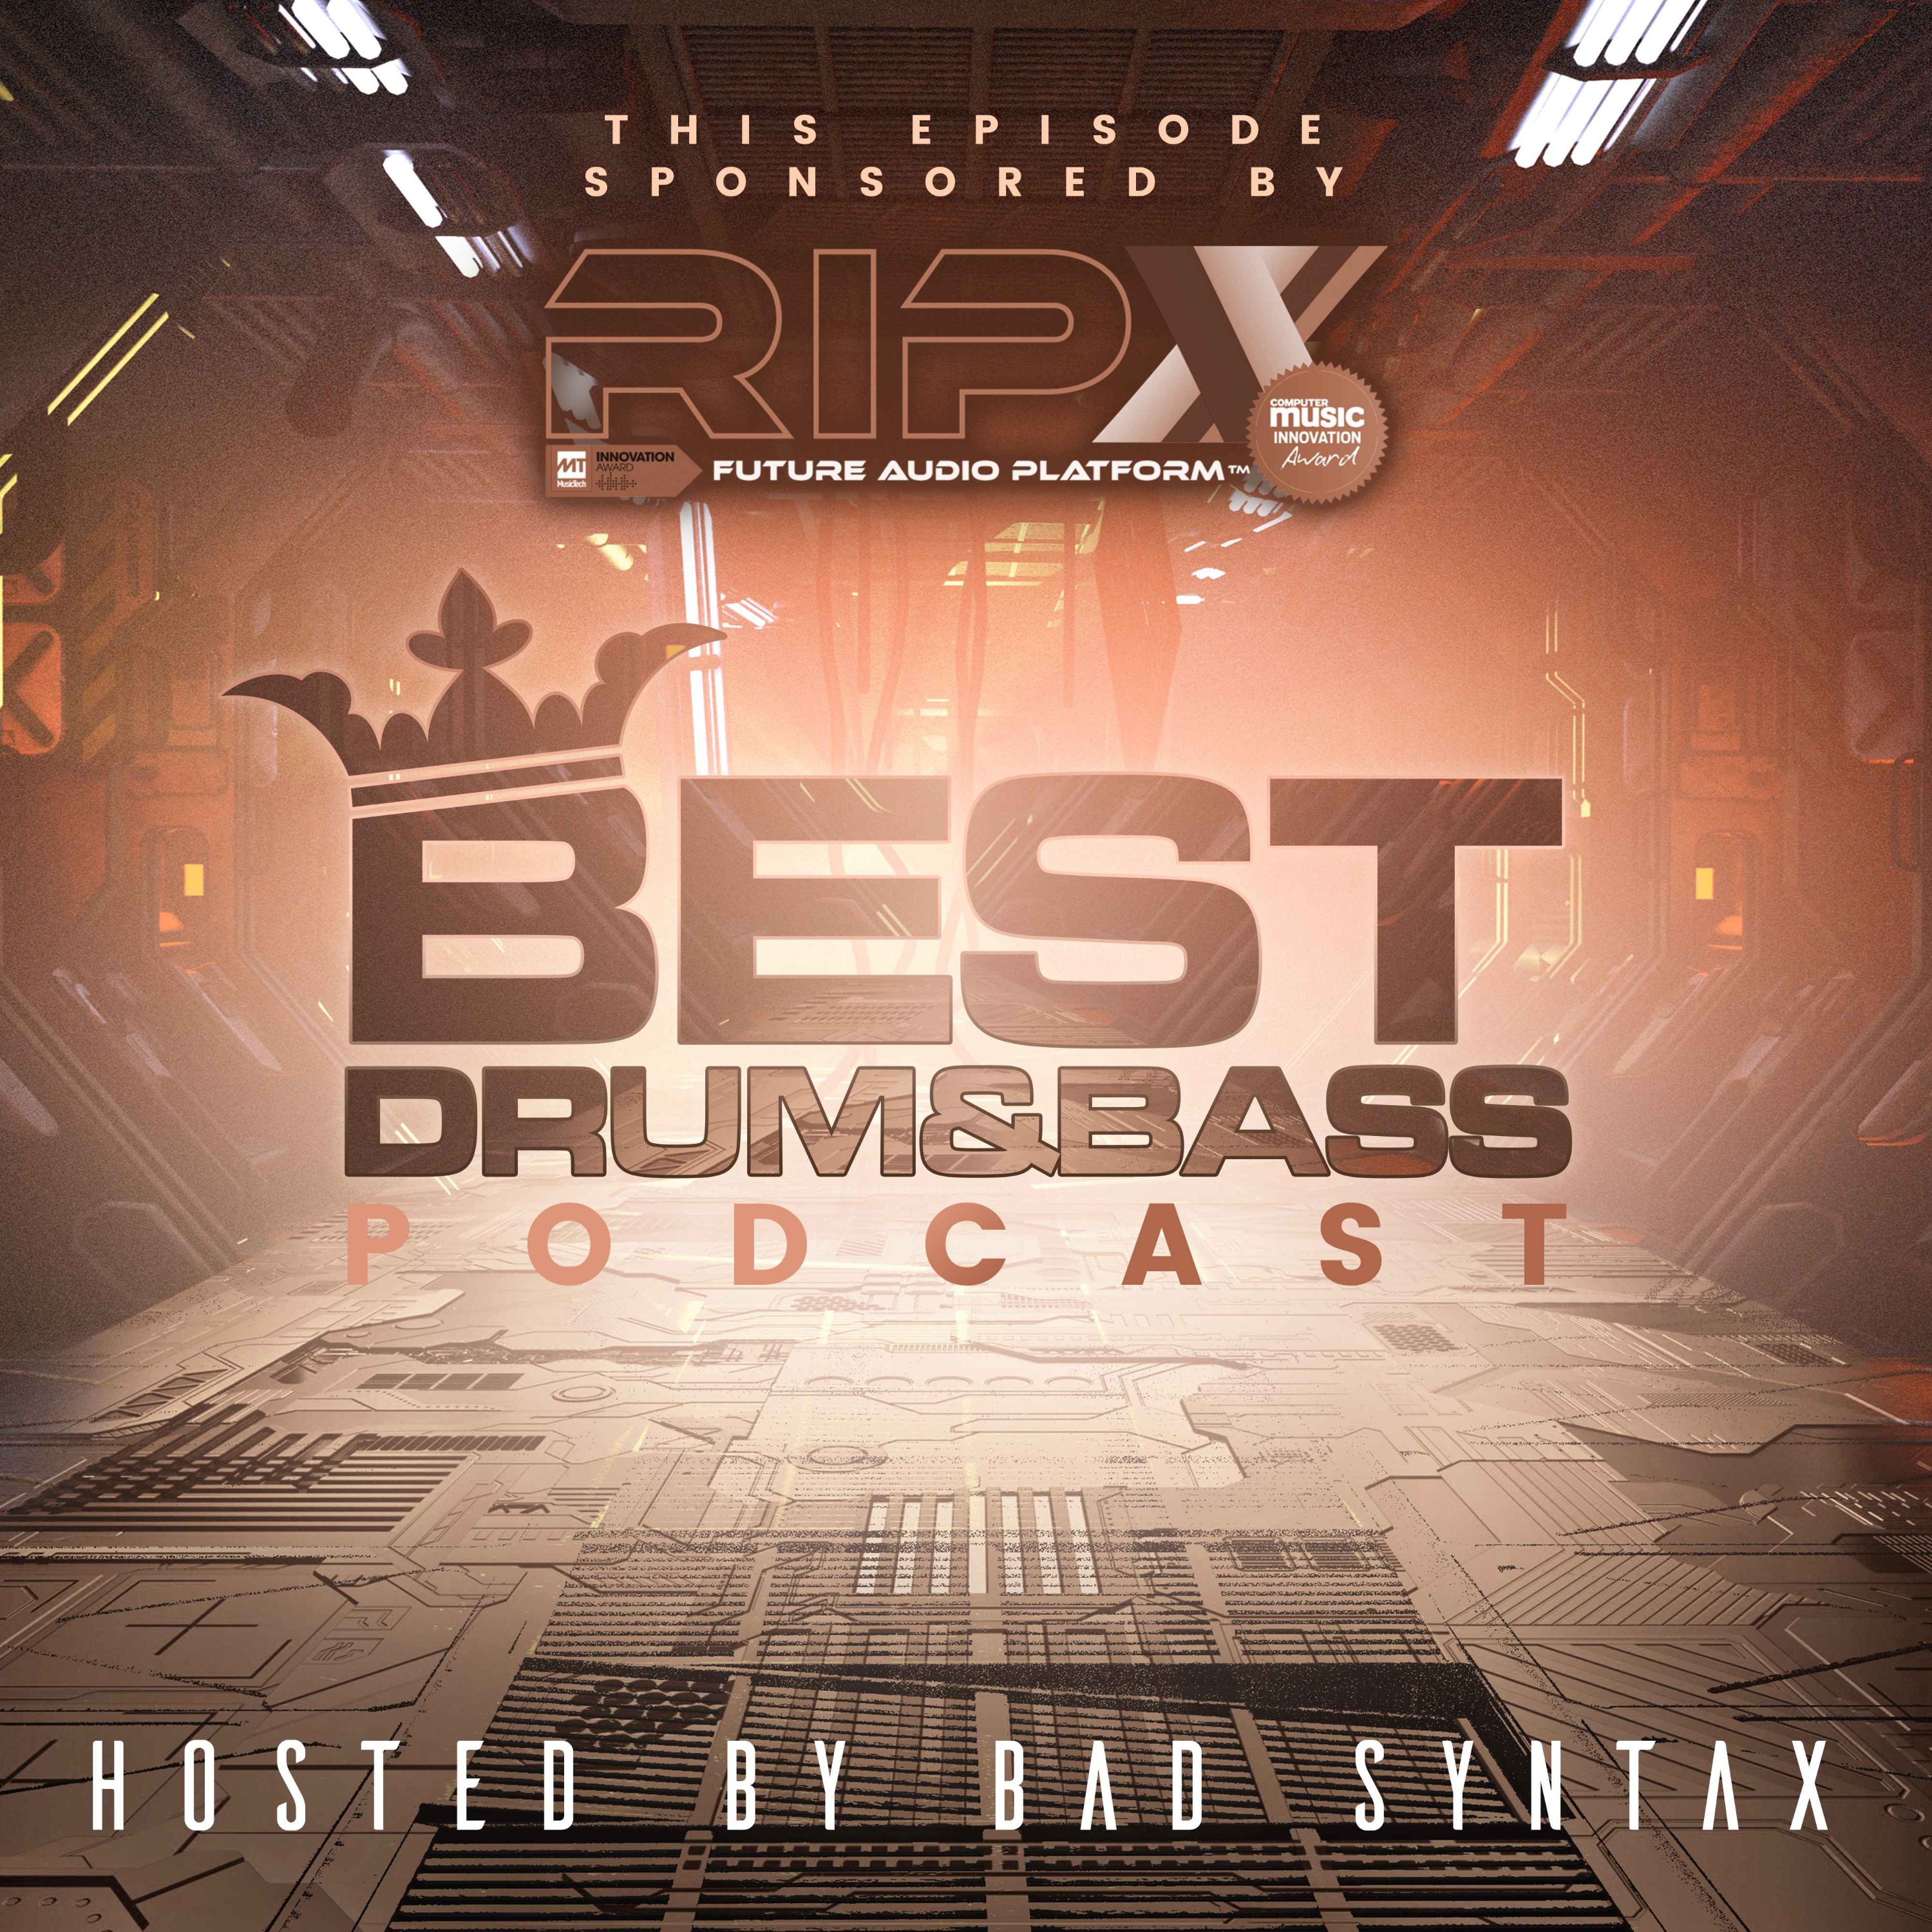 Podcast 387 - Bad Syntax & Funsized [Sponsored by RipX] Artwork